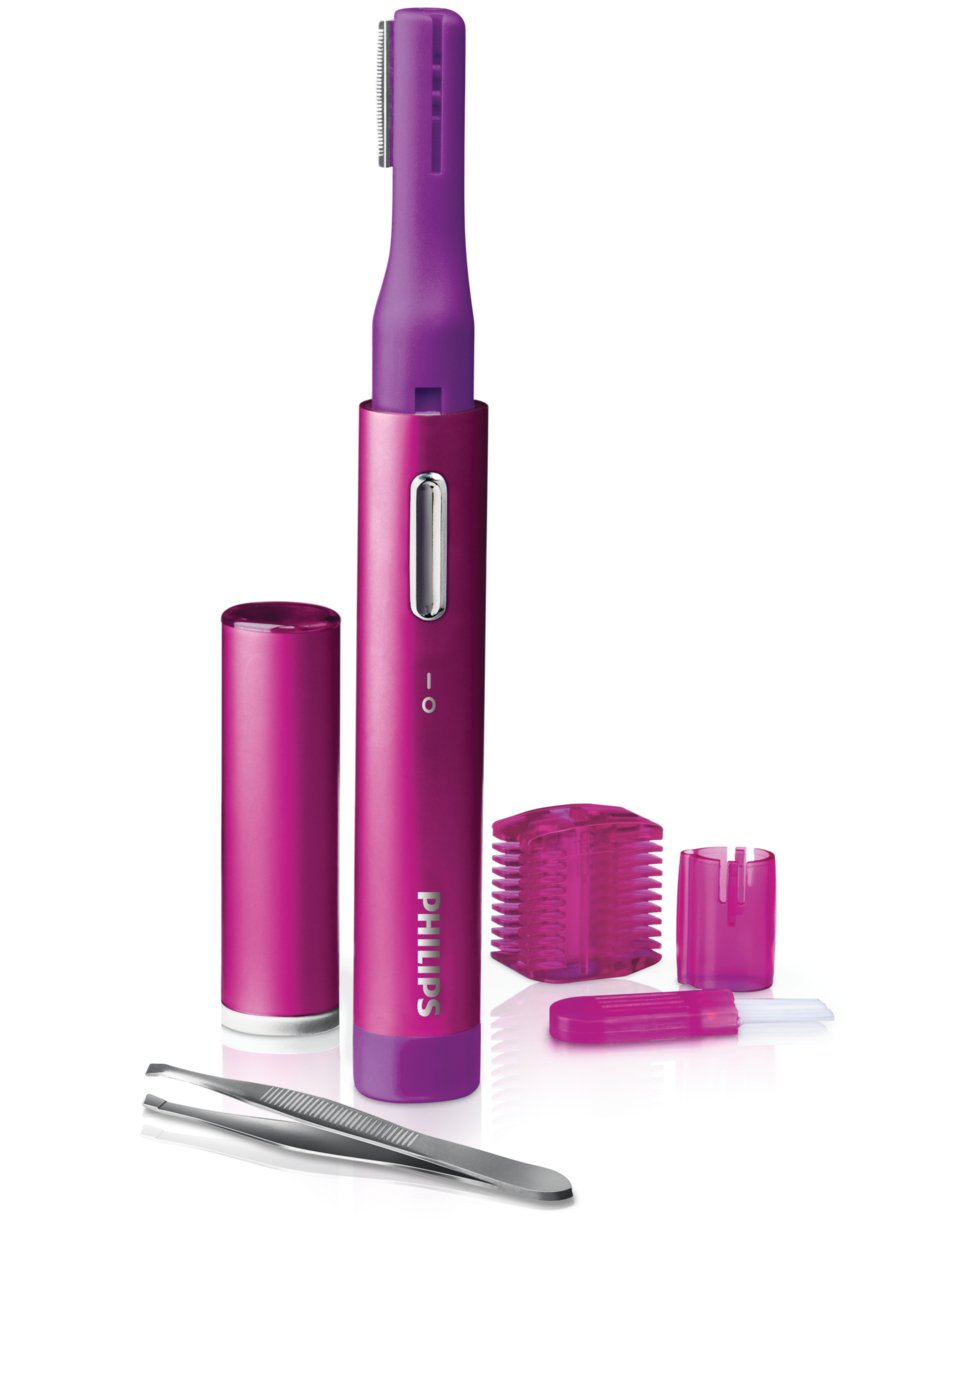 Philips Precision Perfect Facial Trimmer review